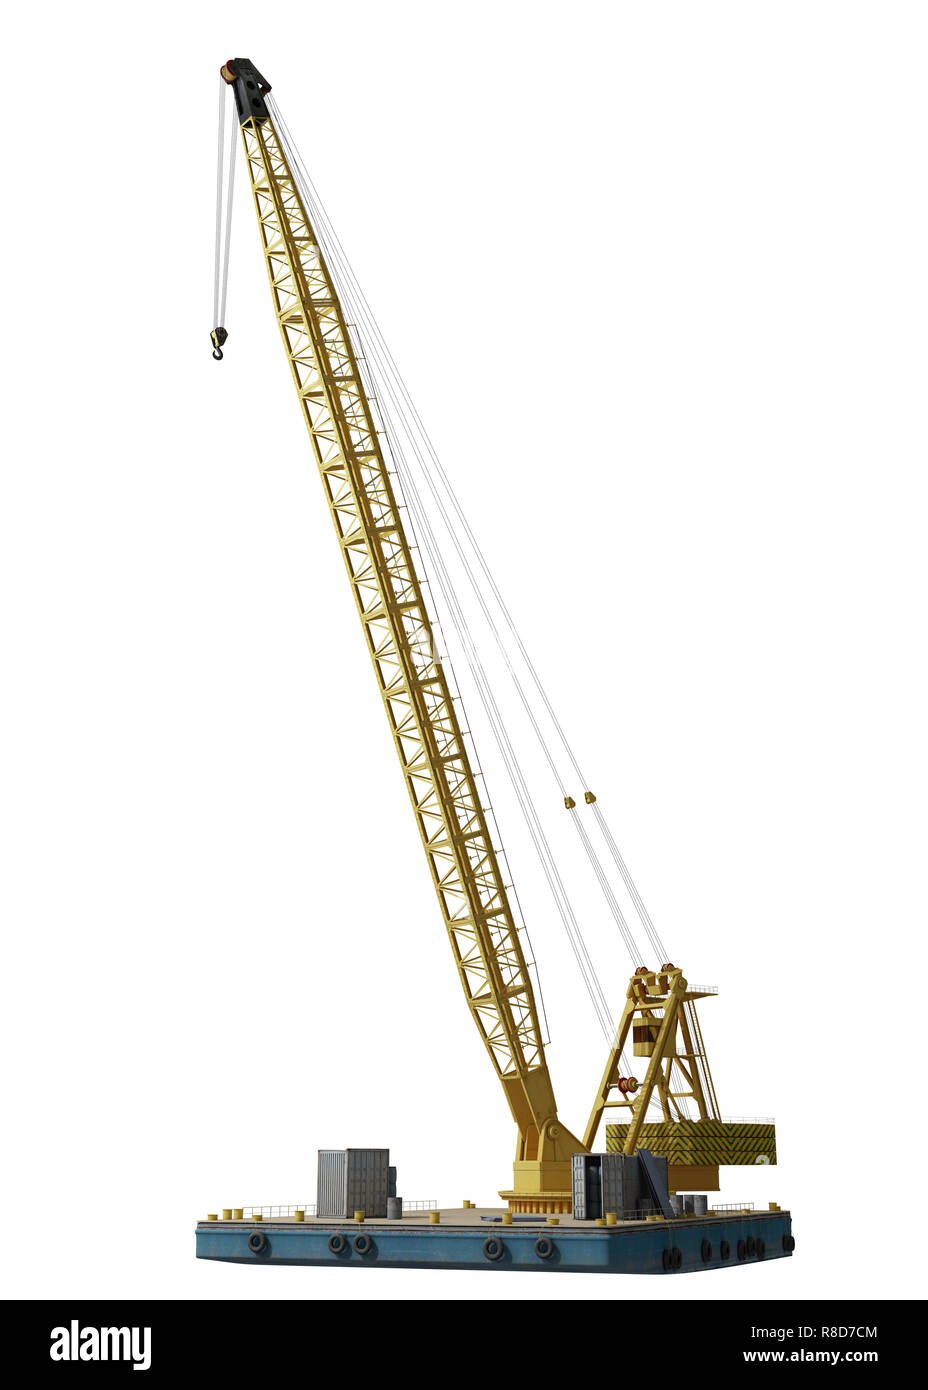 industrial water crane loading cargo isolated on white background Stock Photo